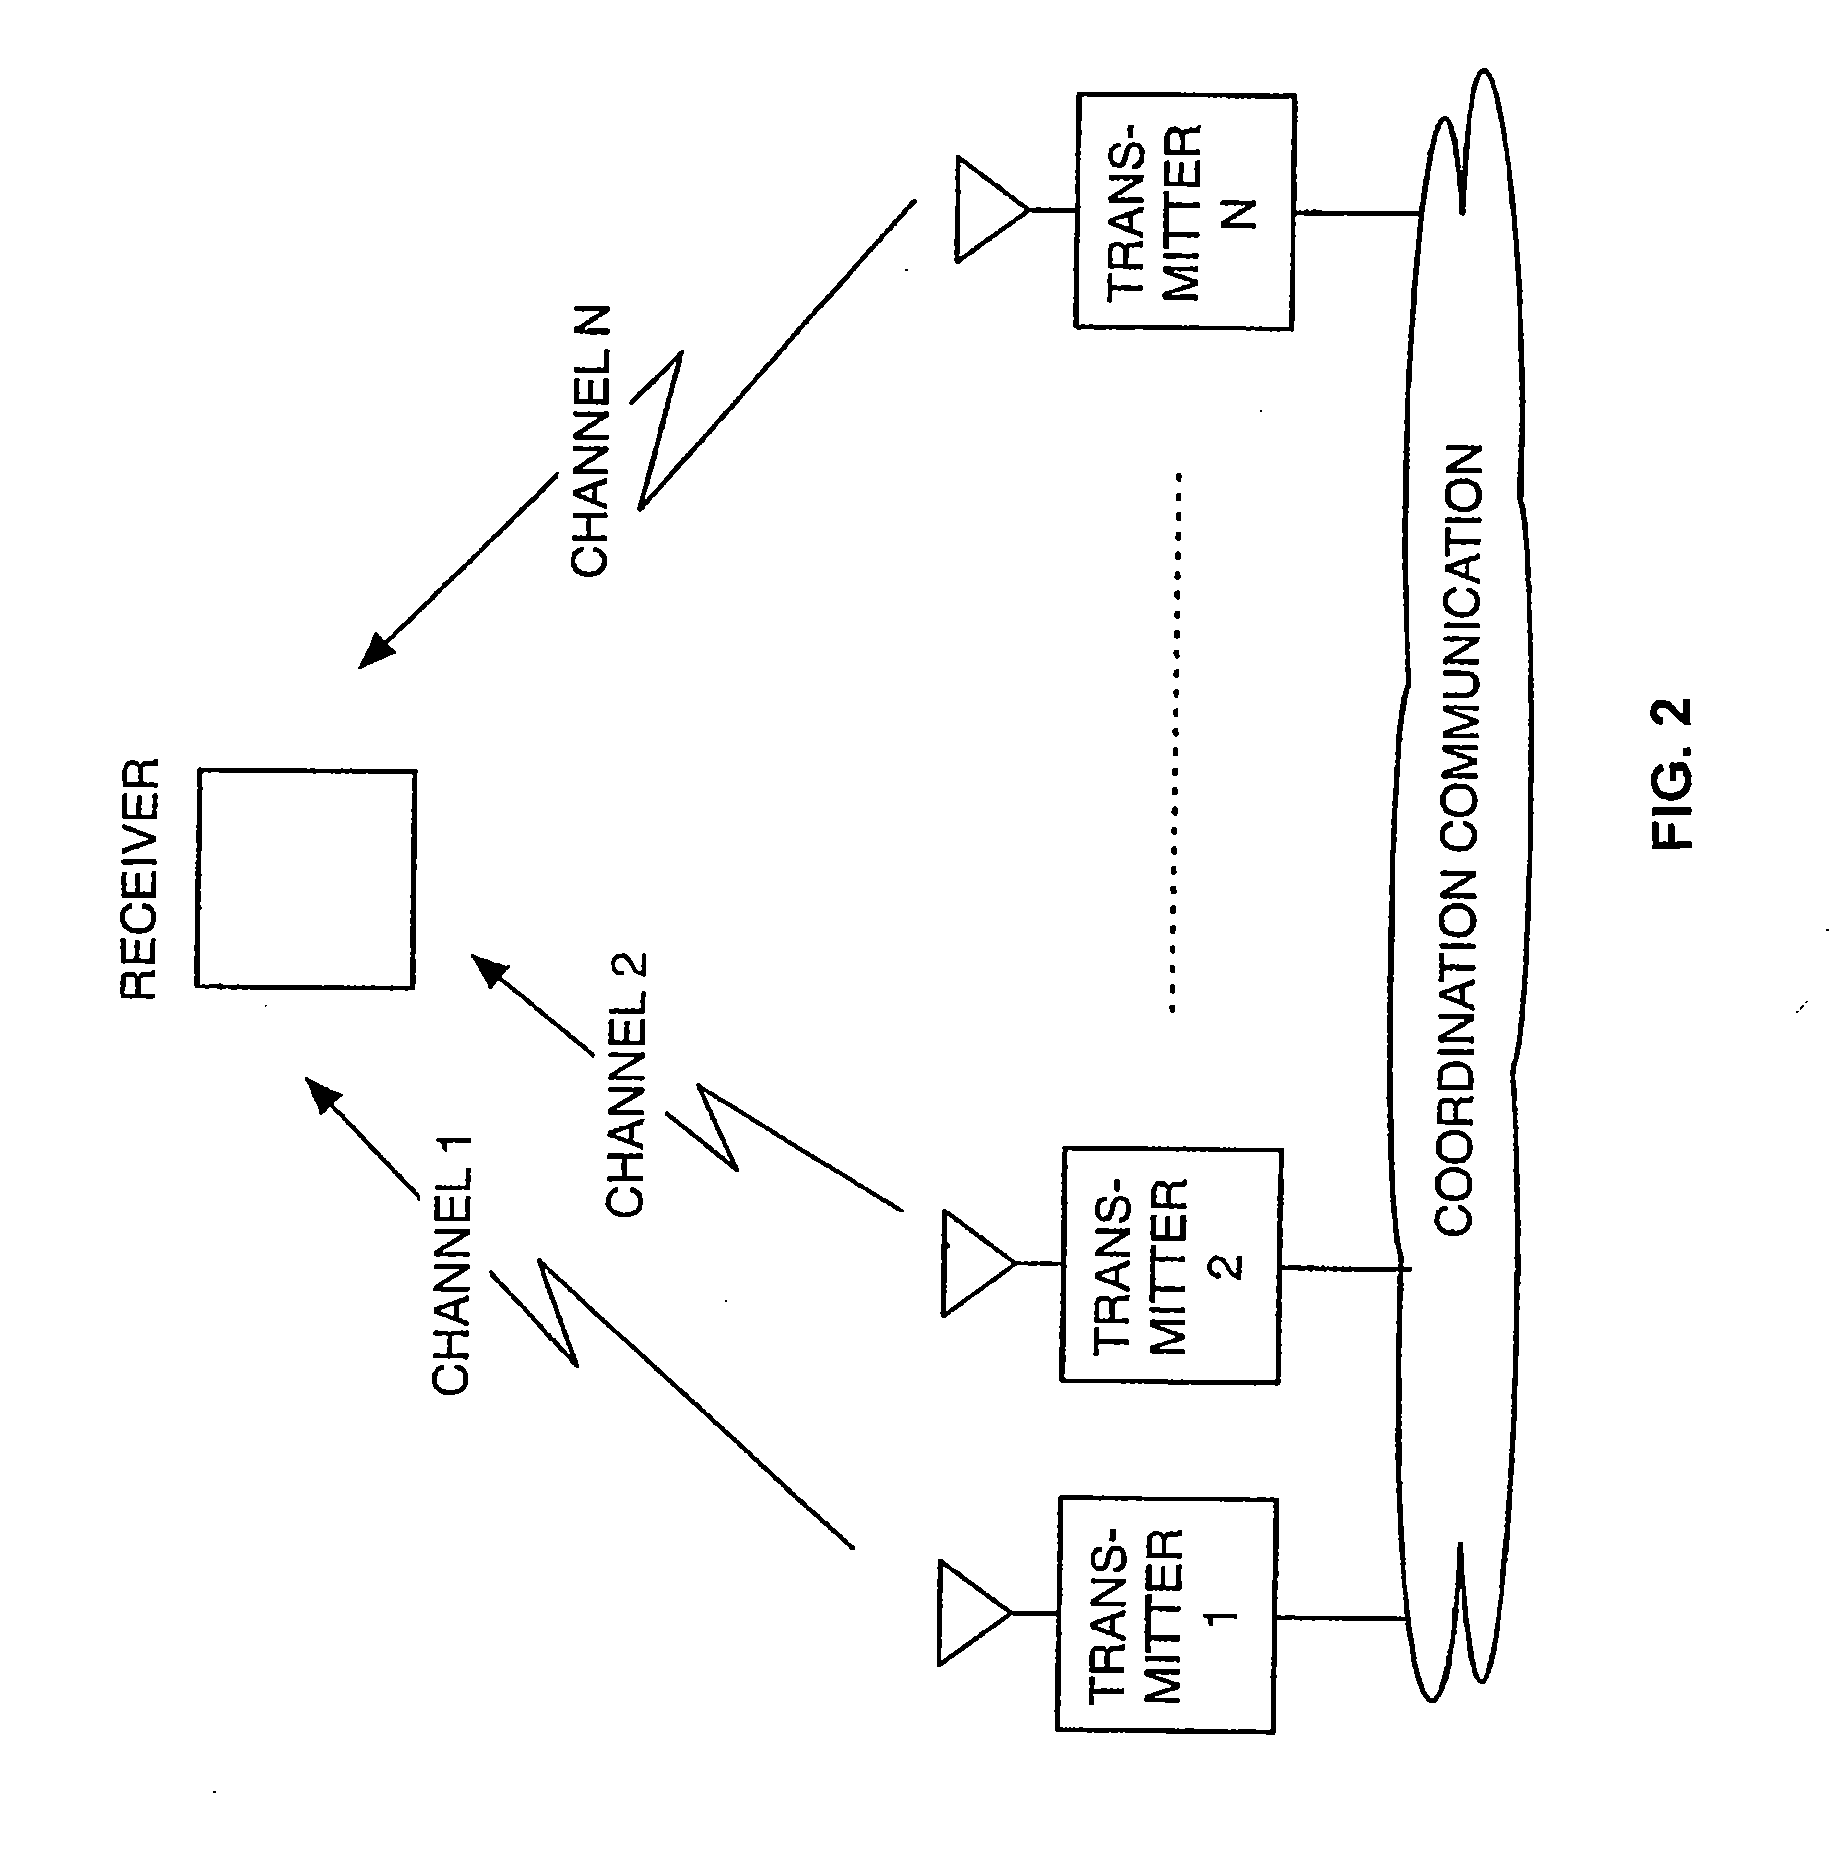 Method and System for Cooperative Communications with Minimal Coordination